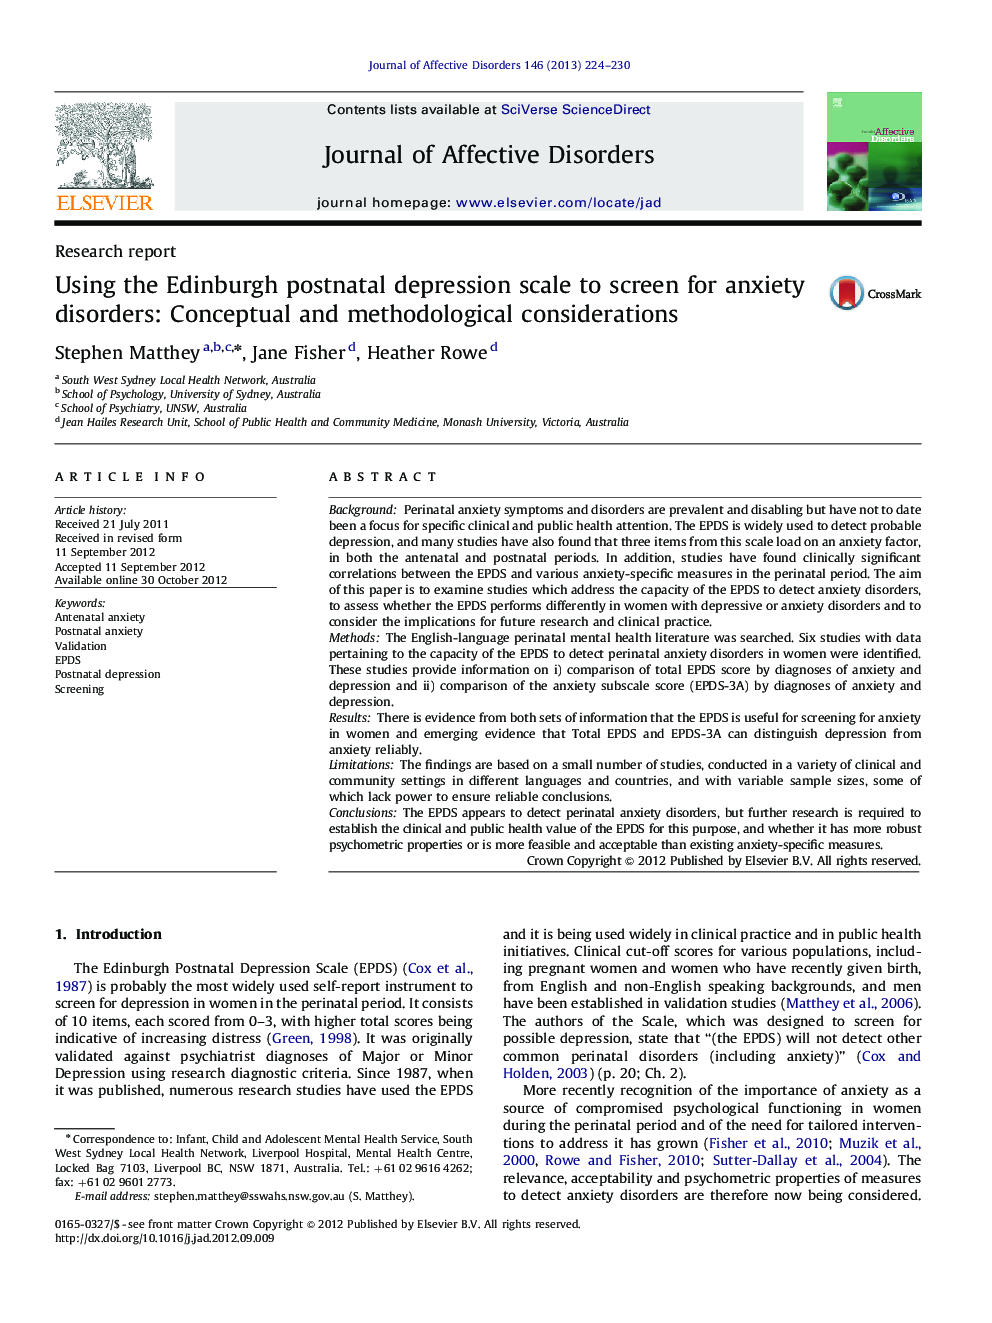 Using the Edinburgh postnatal depression scale to screen for anxiety disorders: Conceptual and methodological considerations